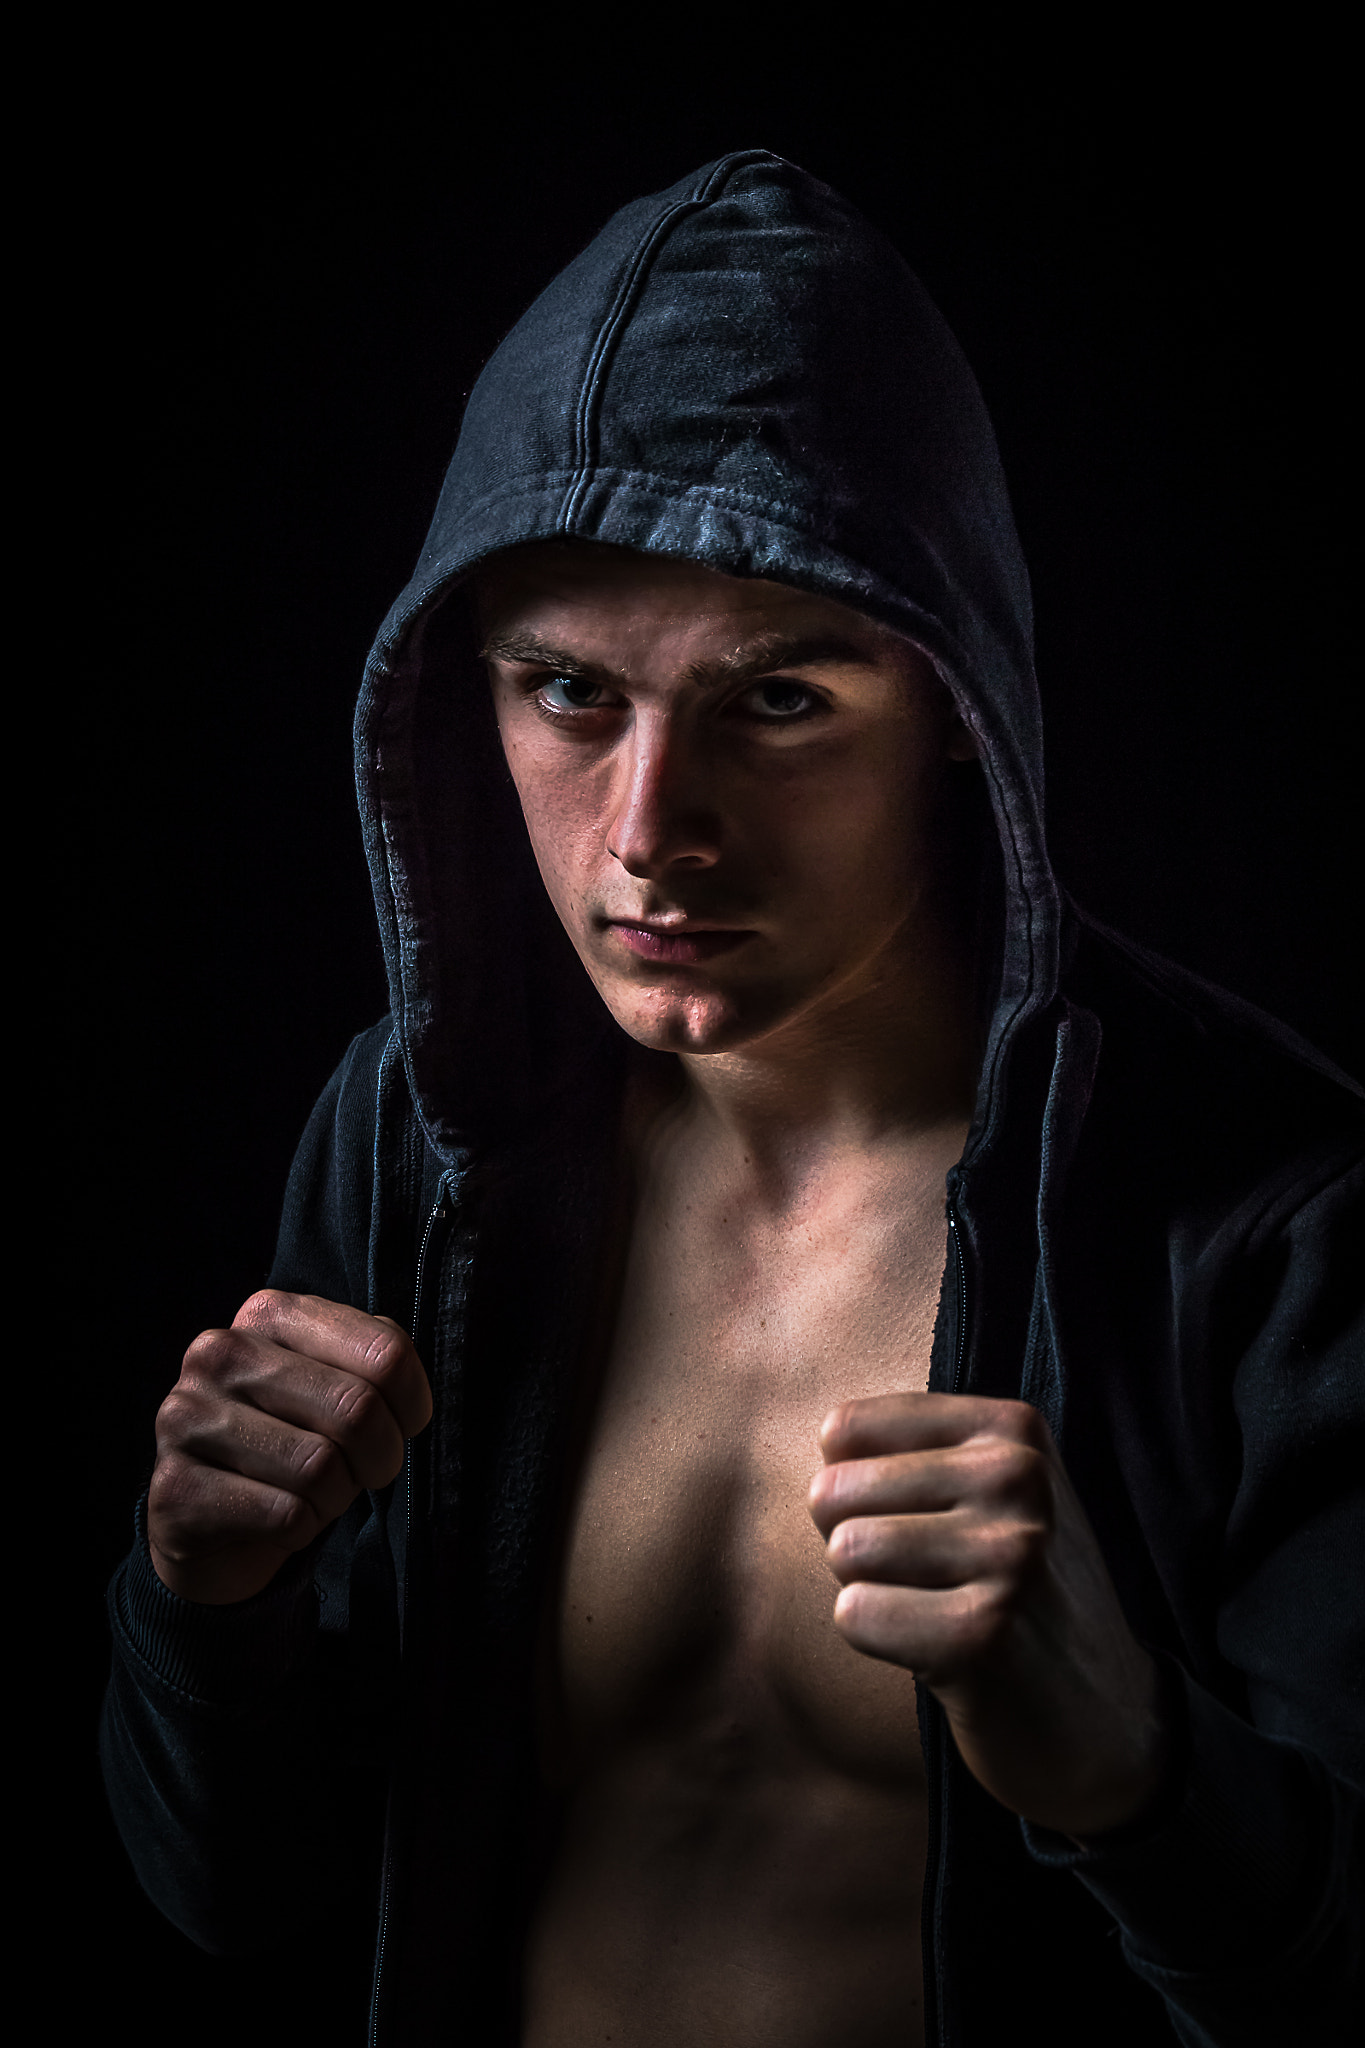 Canon EOS 70D + Sigma 24-105mm f/4 DG OS HSM | A sample photo. Boxing photography